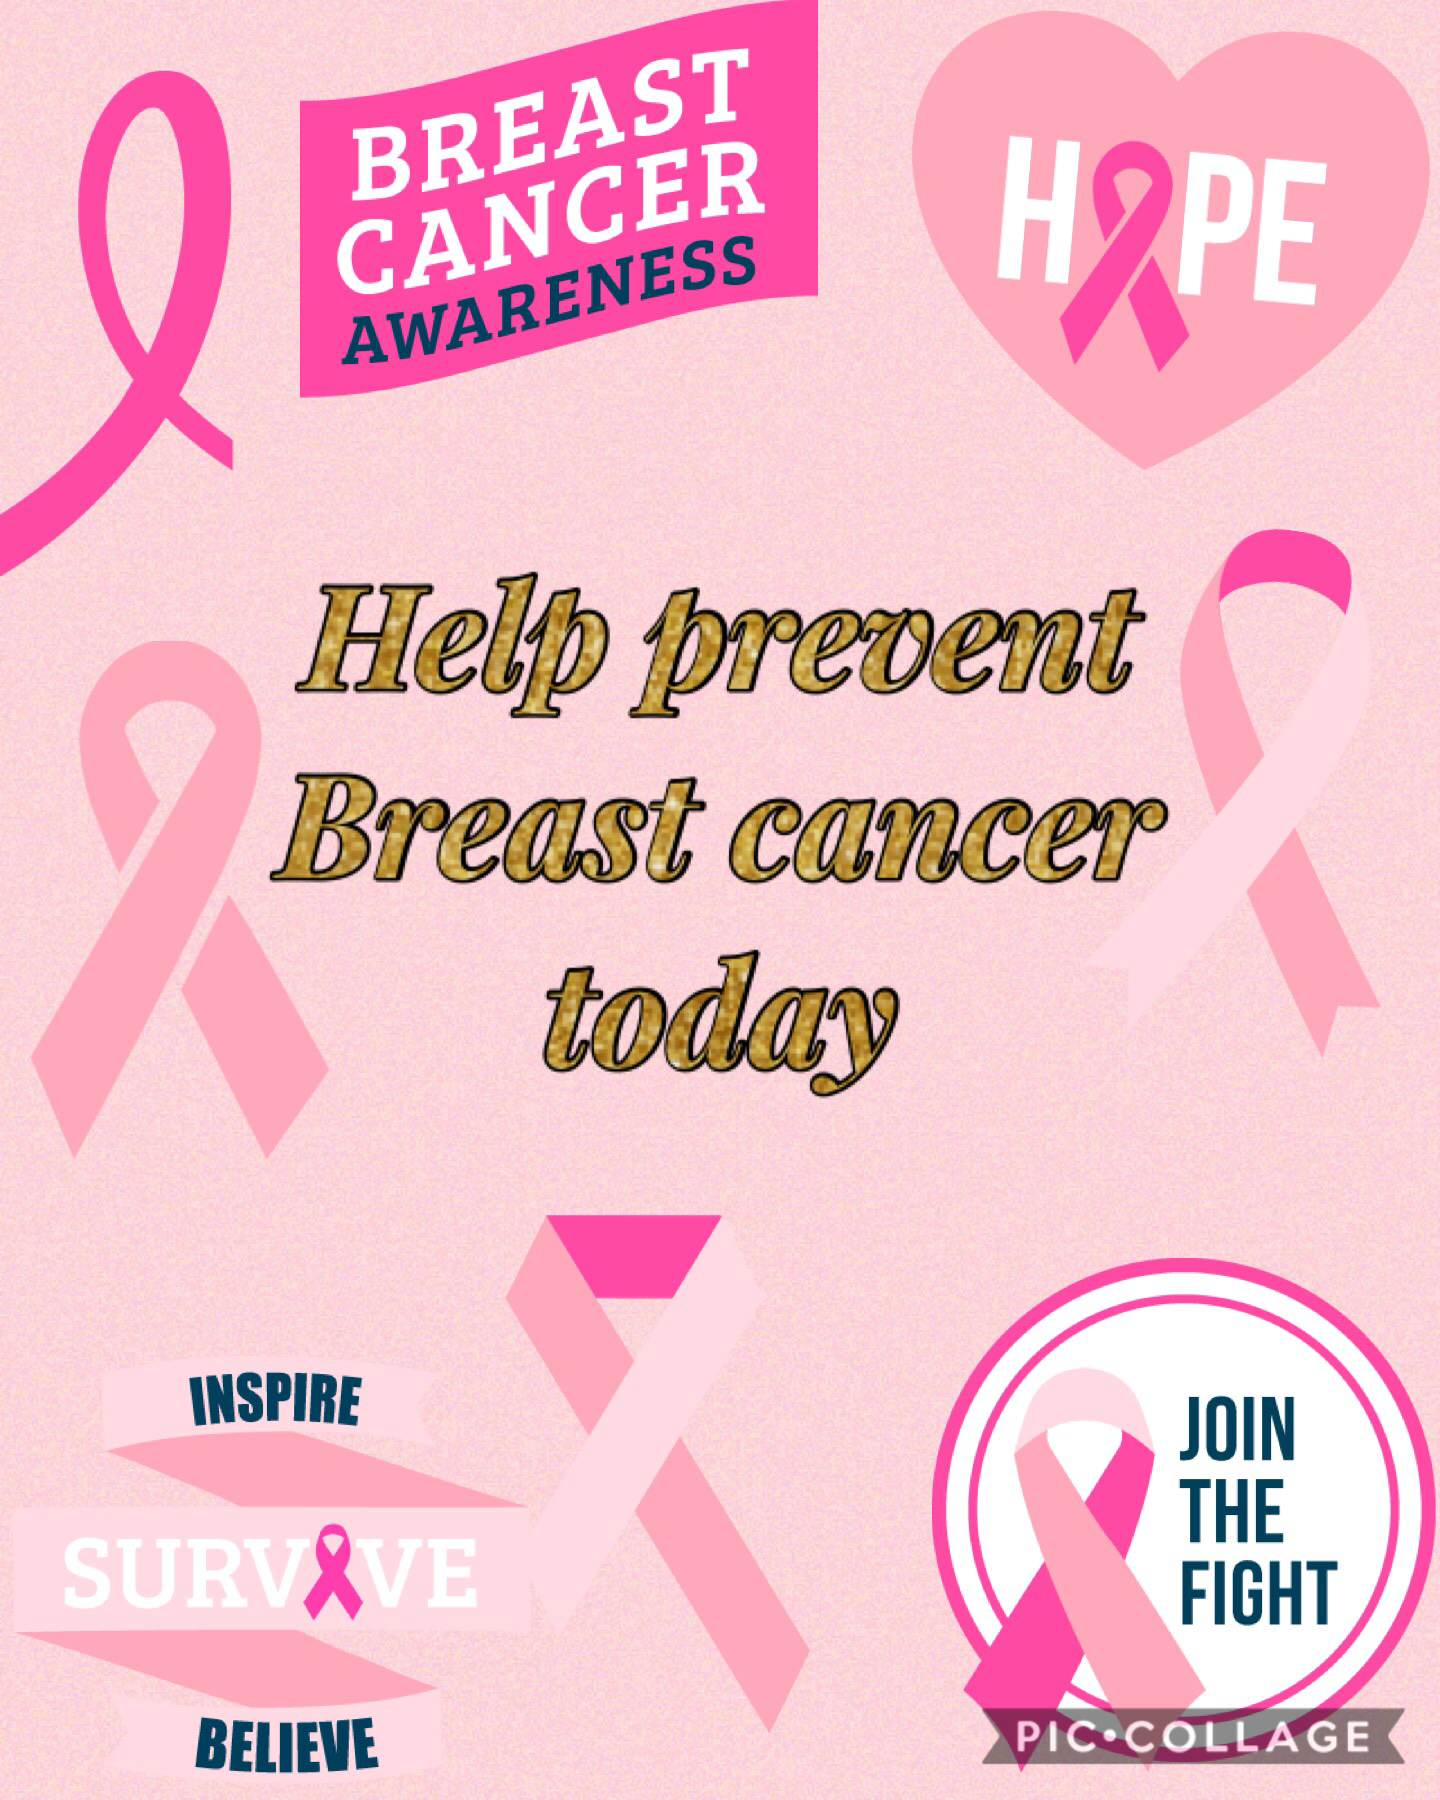 This is for my mum who has suffered from cancer and is still battaling it out today help prevent breast cancer 💕